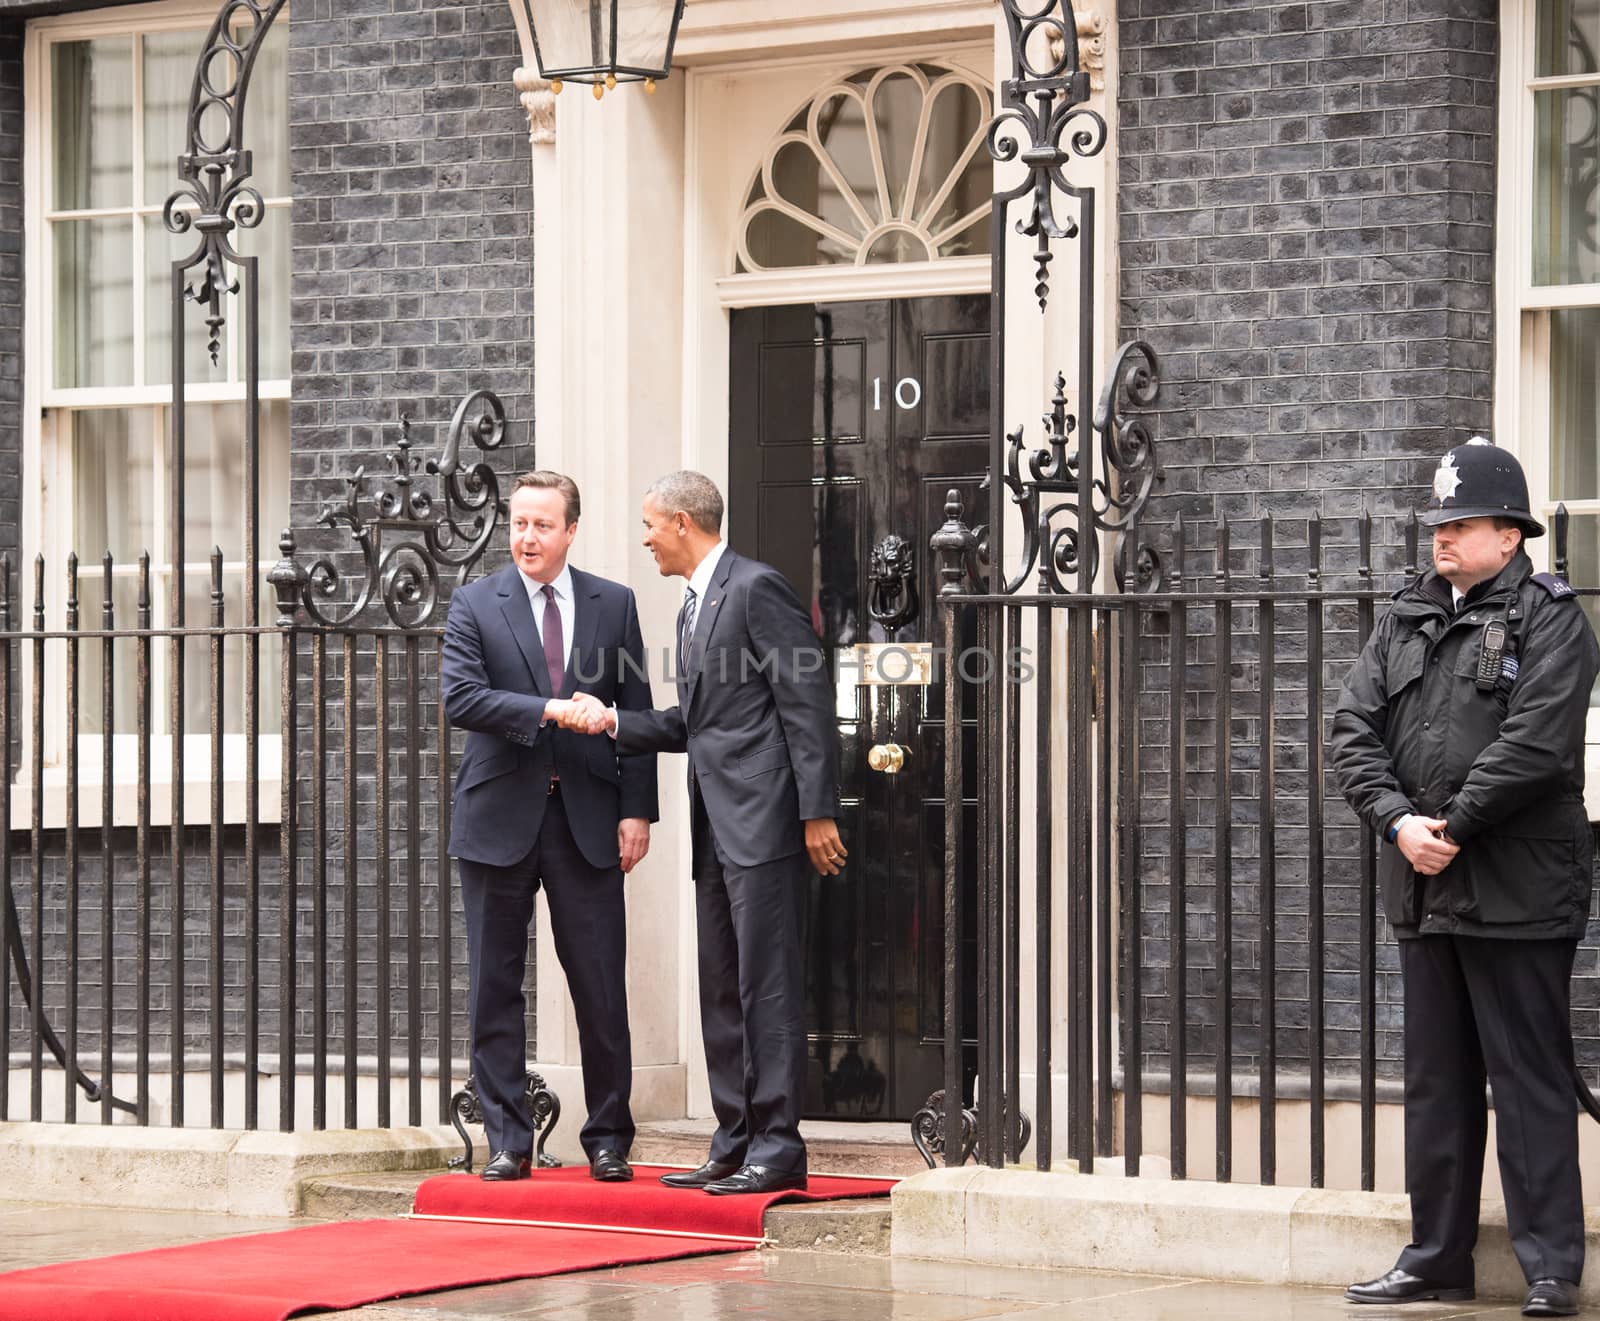 UK, London: President Barack Obama shakes hands with British Prime Minister David Cameron, at 10 Downing Street in London, on his last official visit to the UK, on April 22, 2016.Obama urged the UK to stay in the European Union, amid the Brexit debate. He also addressed the special relationship that the two nations have. 